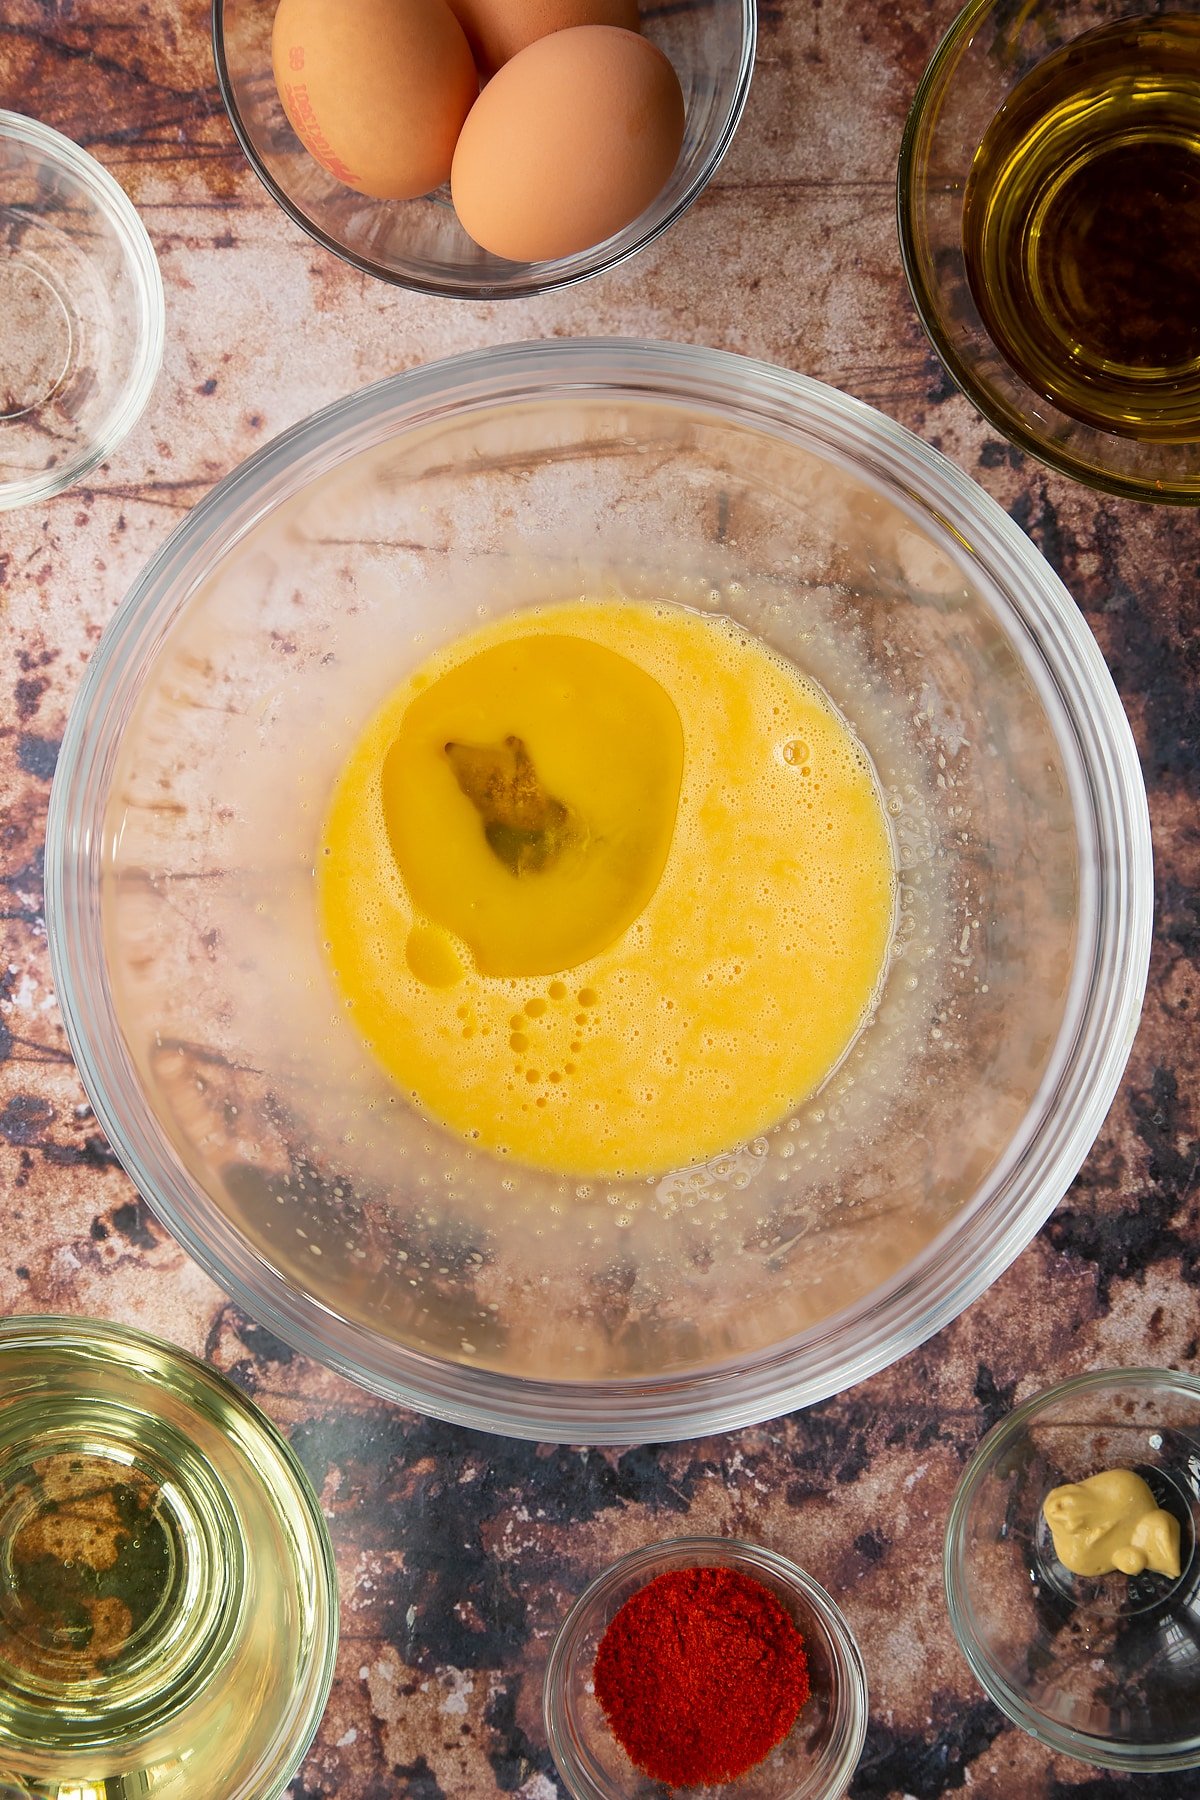 Vinegar, egg yolks and mustard whisked together in a glass mixing bowl with olive oil added. Ingredients to make paprika mayo surround the bowl.